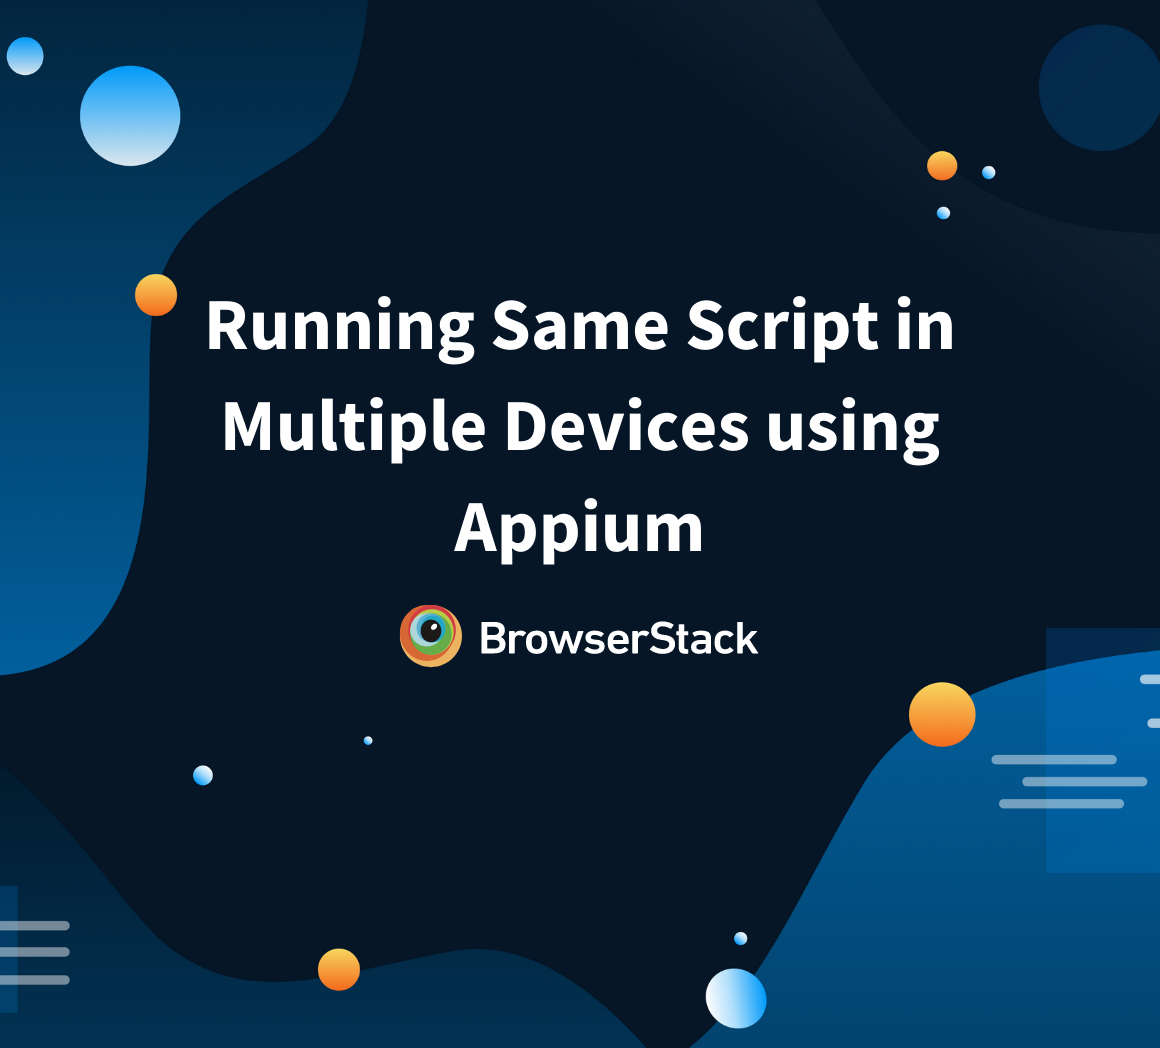 How to Run Same Script in Multiple Devices using Appium